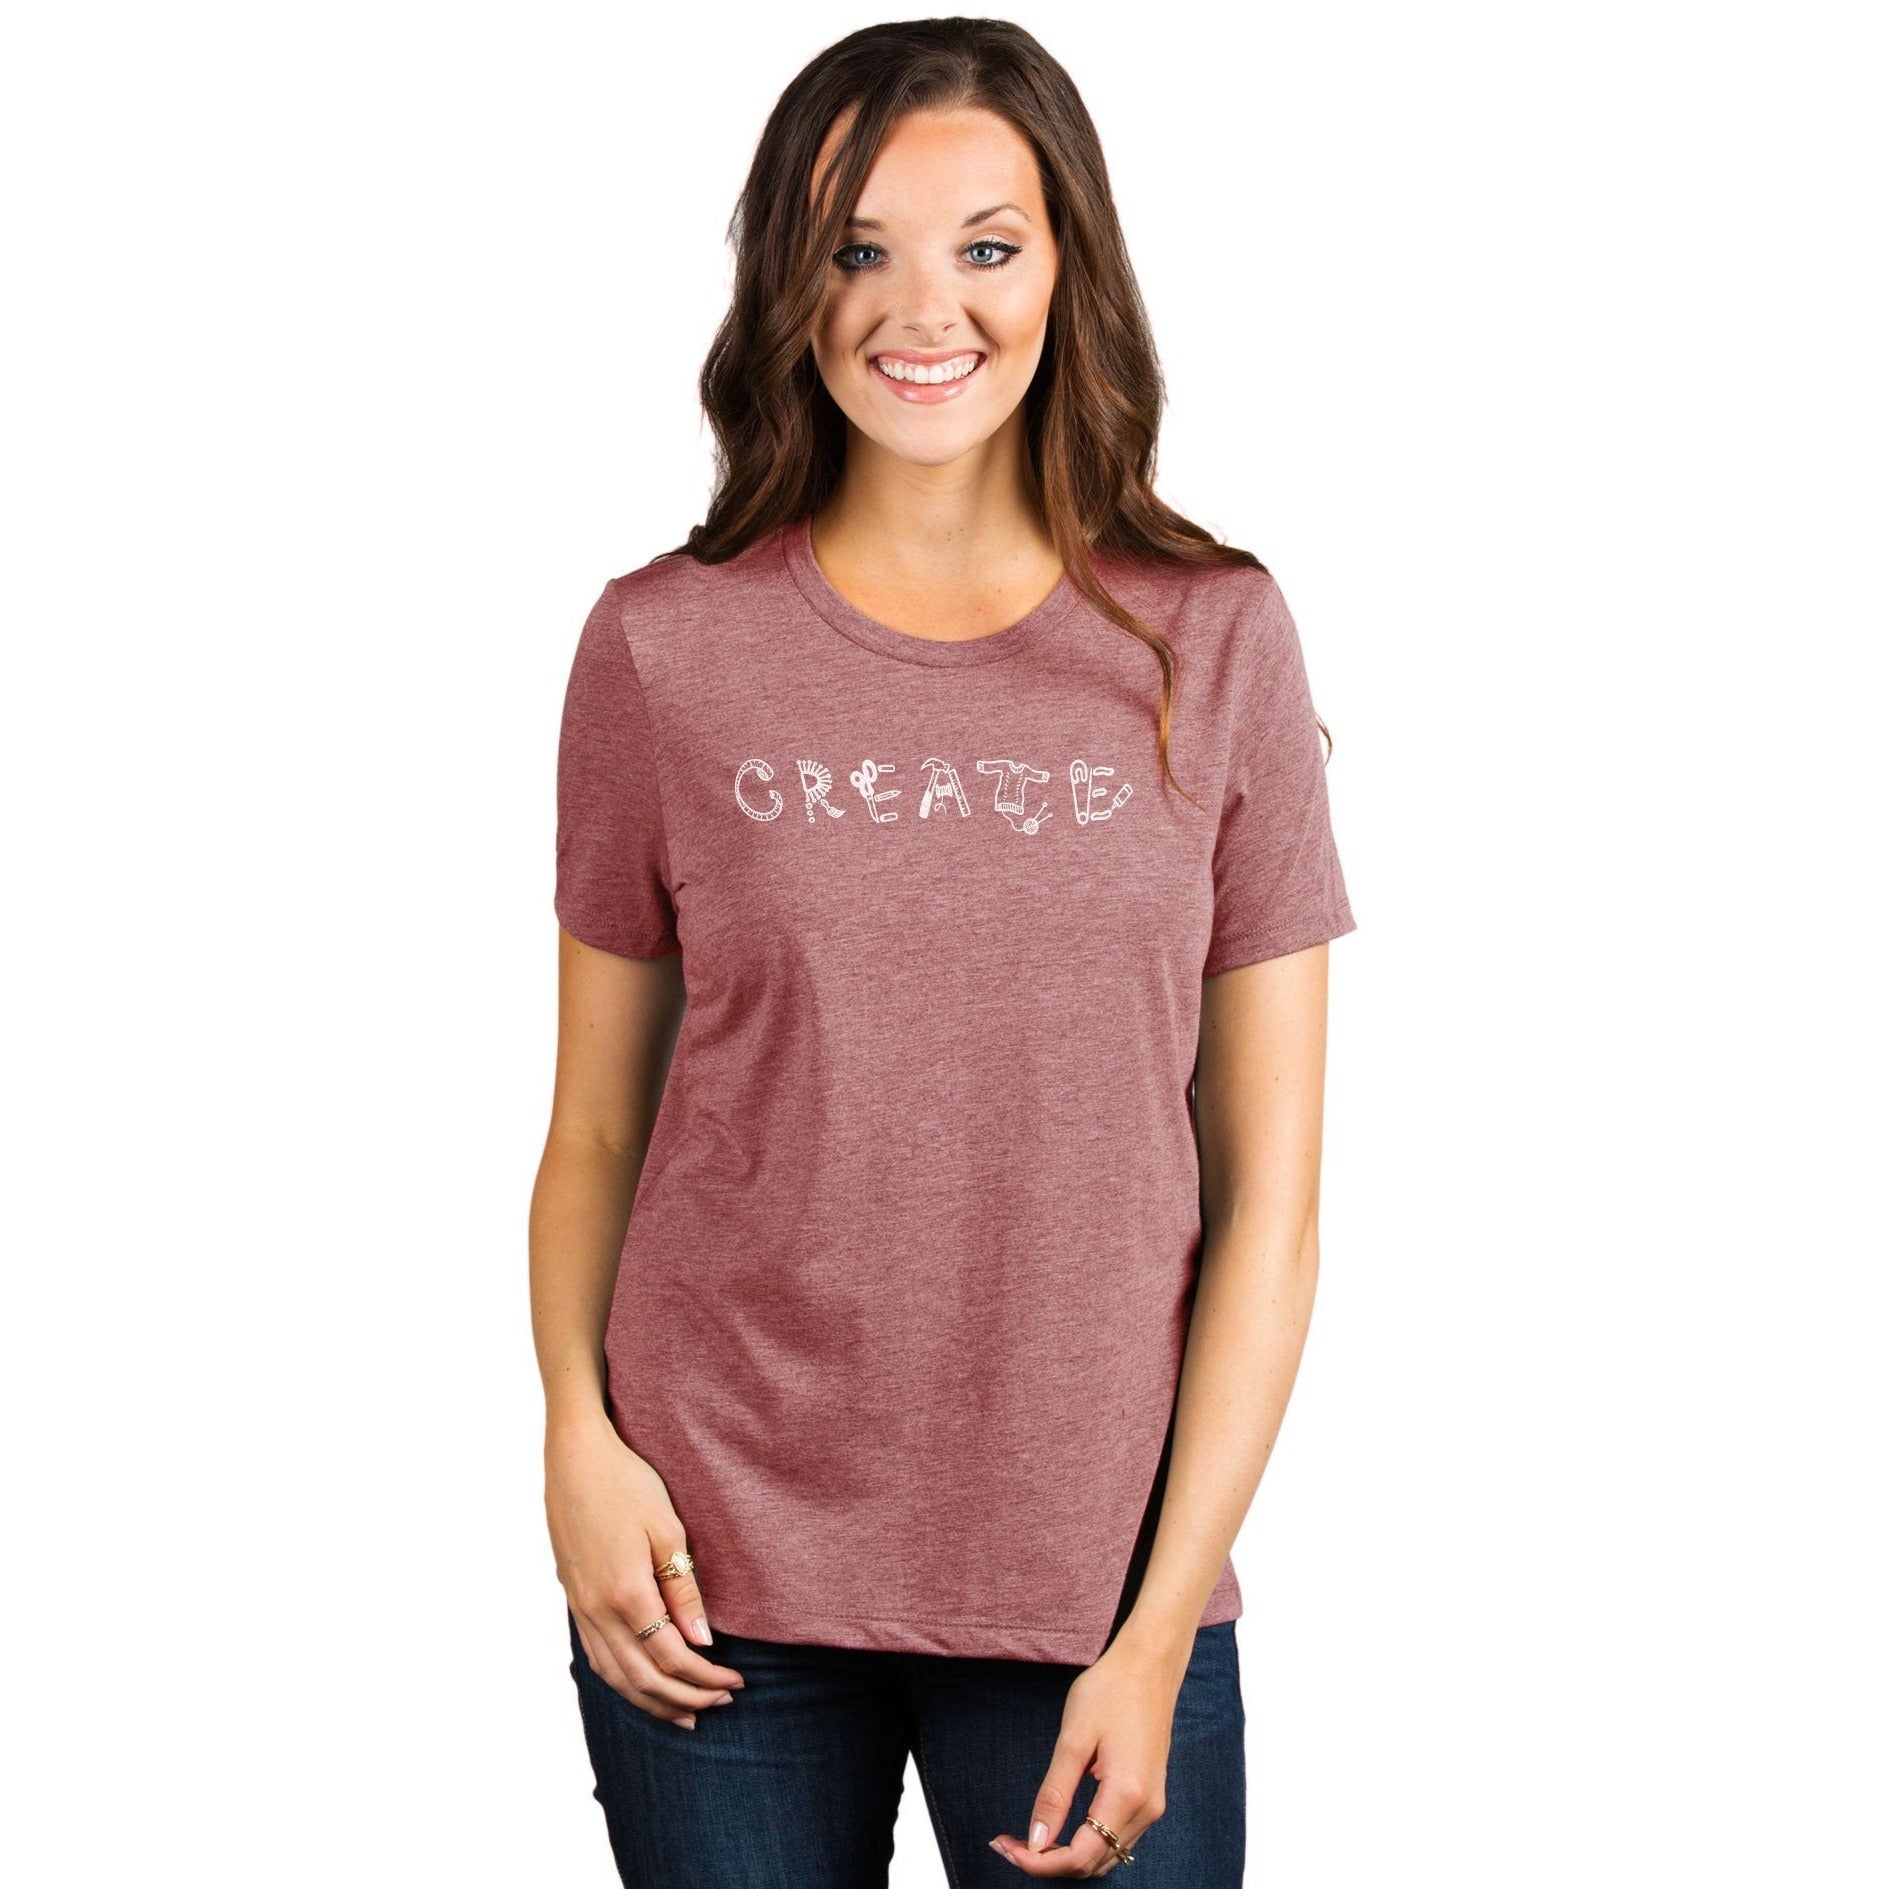 Create Women's Relaxed Crewneck T-Shirt Top Tee Heather Rouge Model
